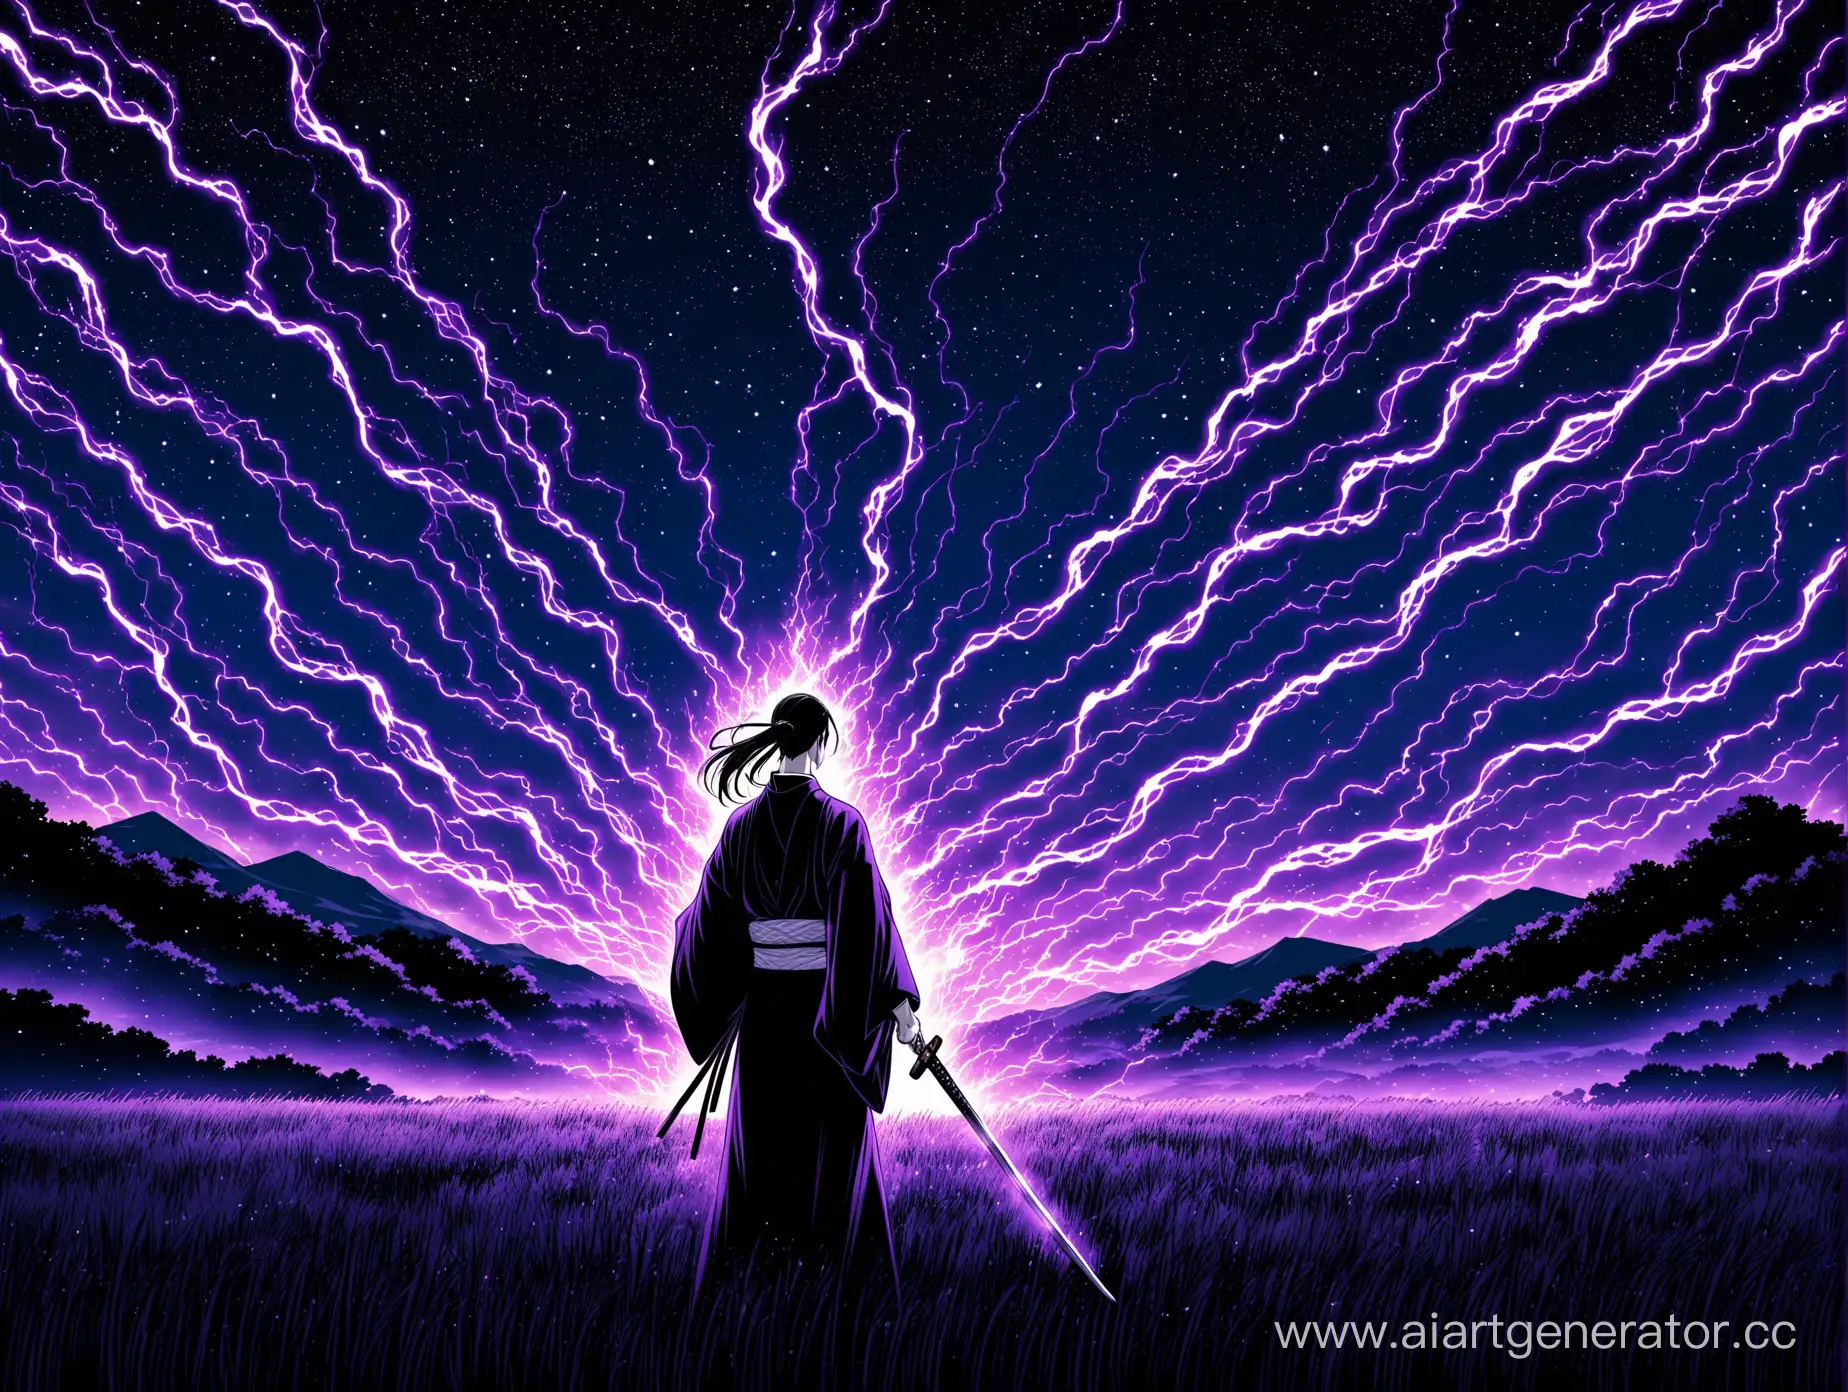 Ethereal-Samurai-Illuminated-by-Electric-Spear-and-Fiery-Katana-in-Starlit-Field